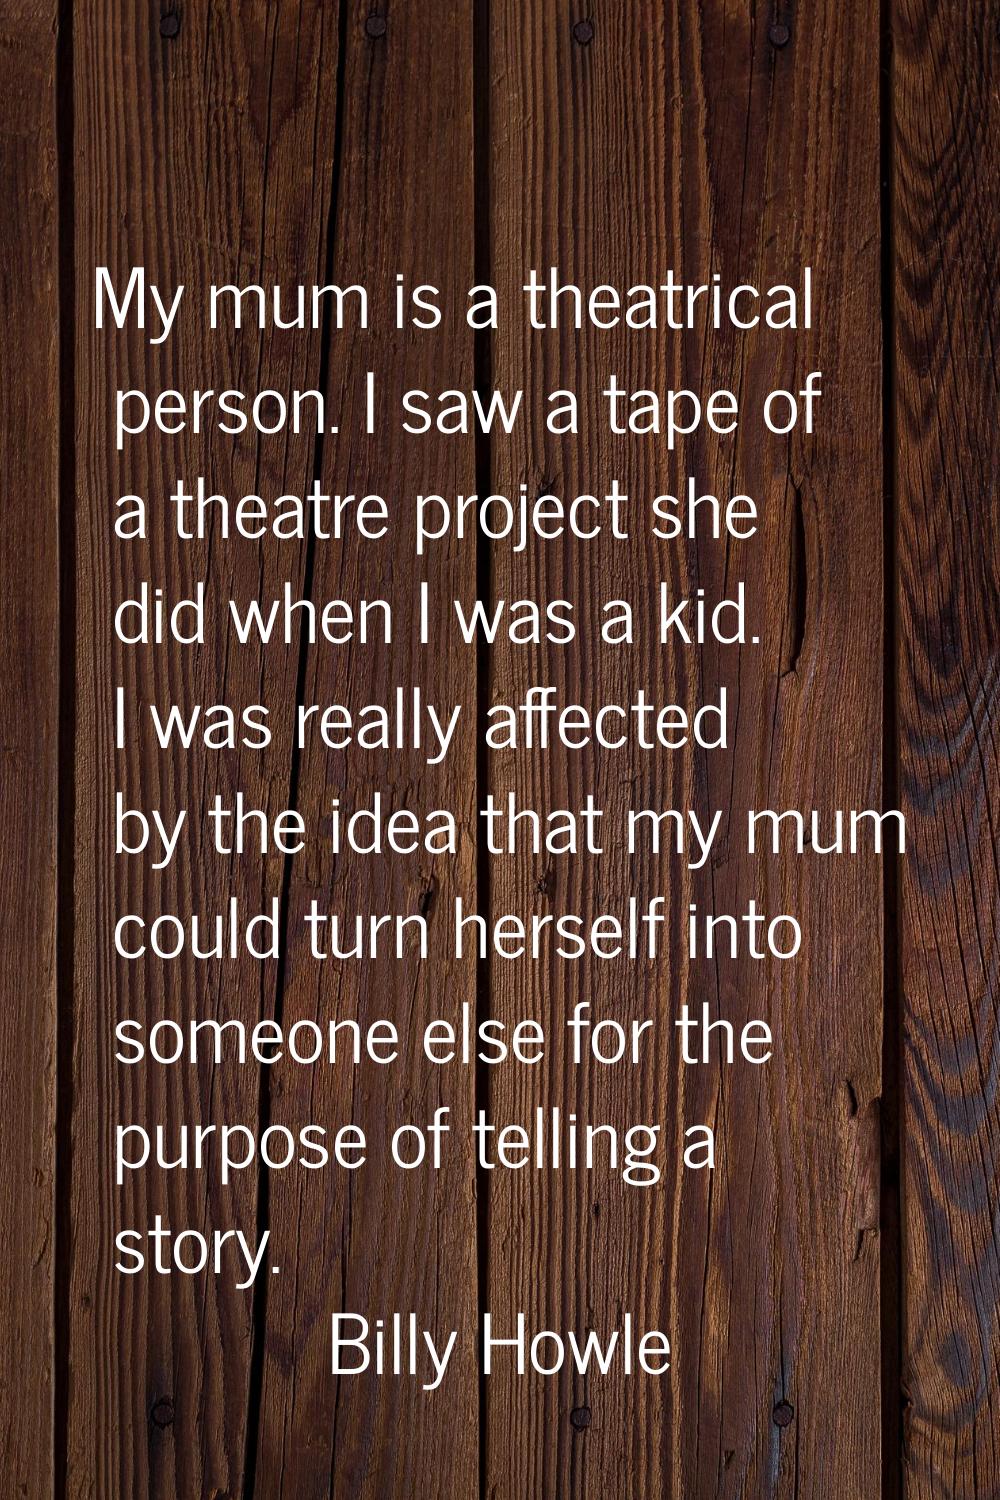 My mum is a theatrical person. I saw a tape of a theatre project she did when I was a kid. I was re